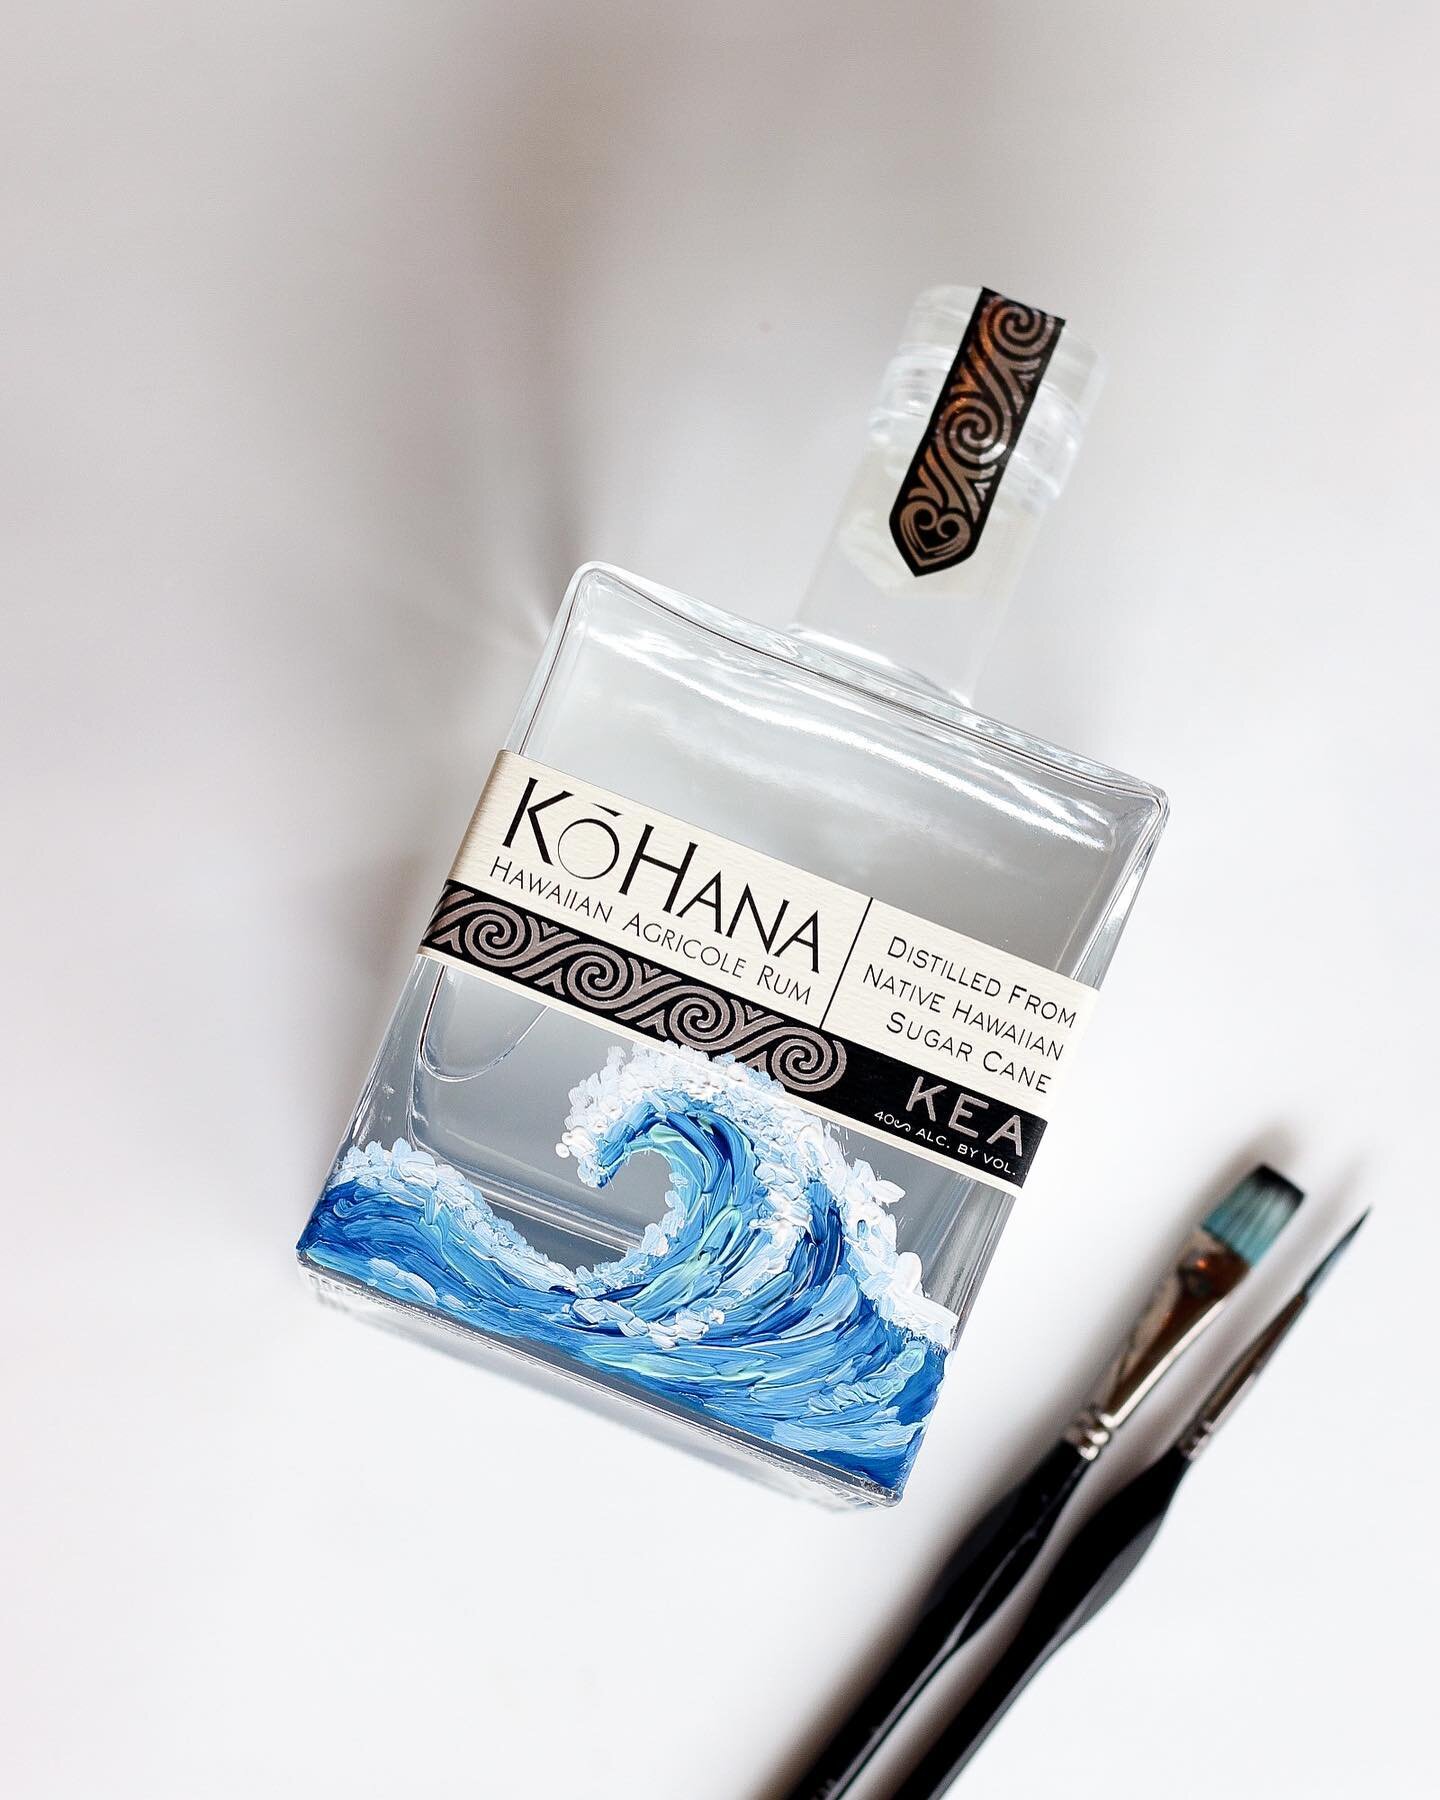 Live painting party at @kohanarum! 

Join us this weekend for a sip and bottle painting! I&rsquo;ll teach you my tips and tricks for painting a wave 🌊 on a Kō Hana bottle, which you&rsquo;ll get to take home at the end of the event. 

You ticket als